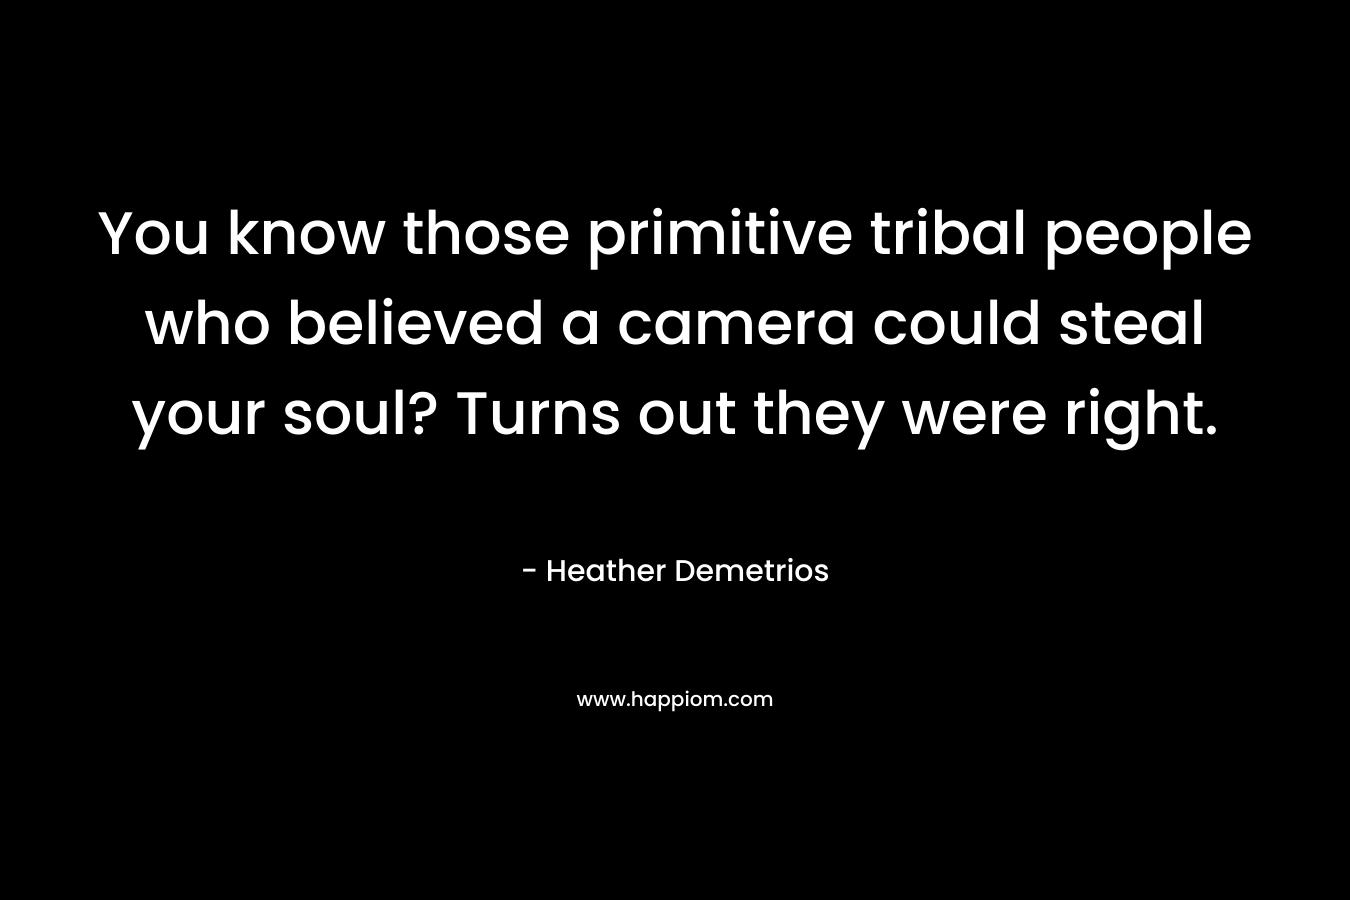 You know those primitive tribal people who believed a camera could steal your soul? Turns out they were right. – Heather Demetrios